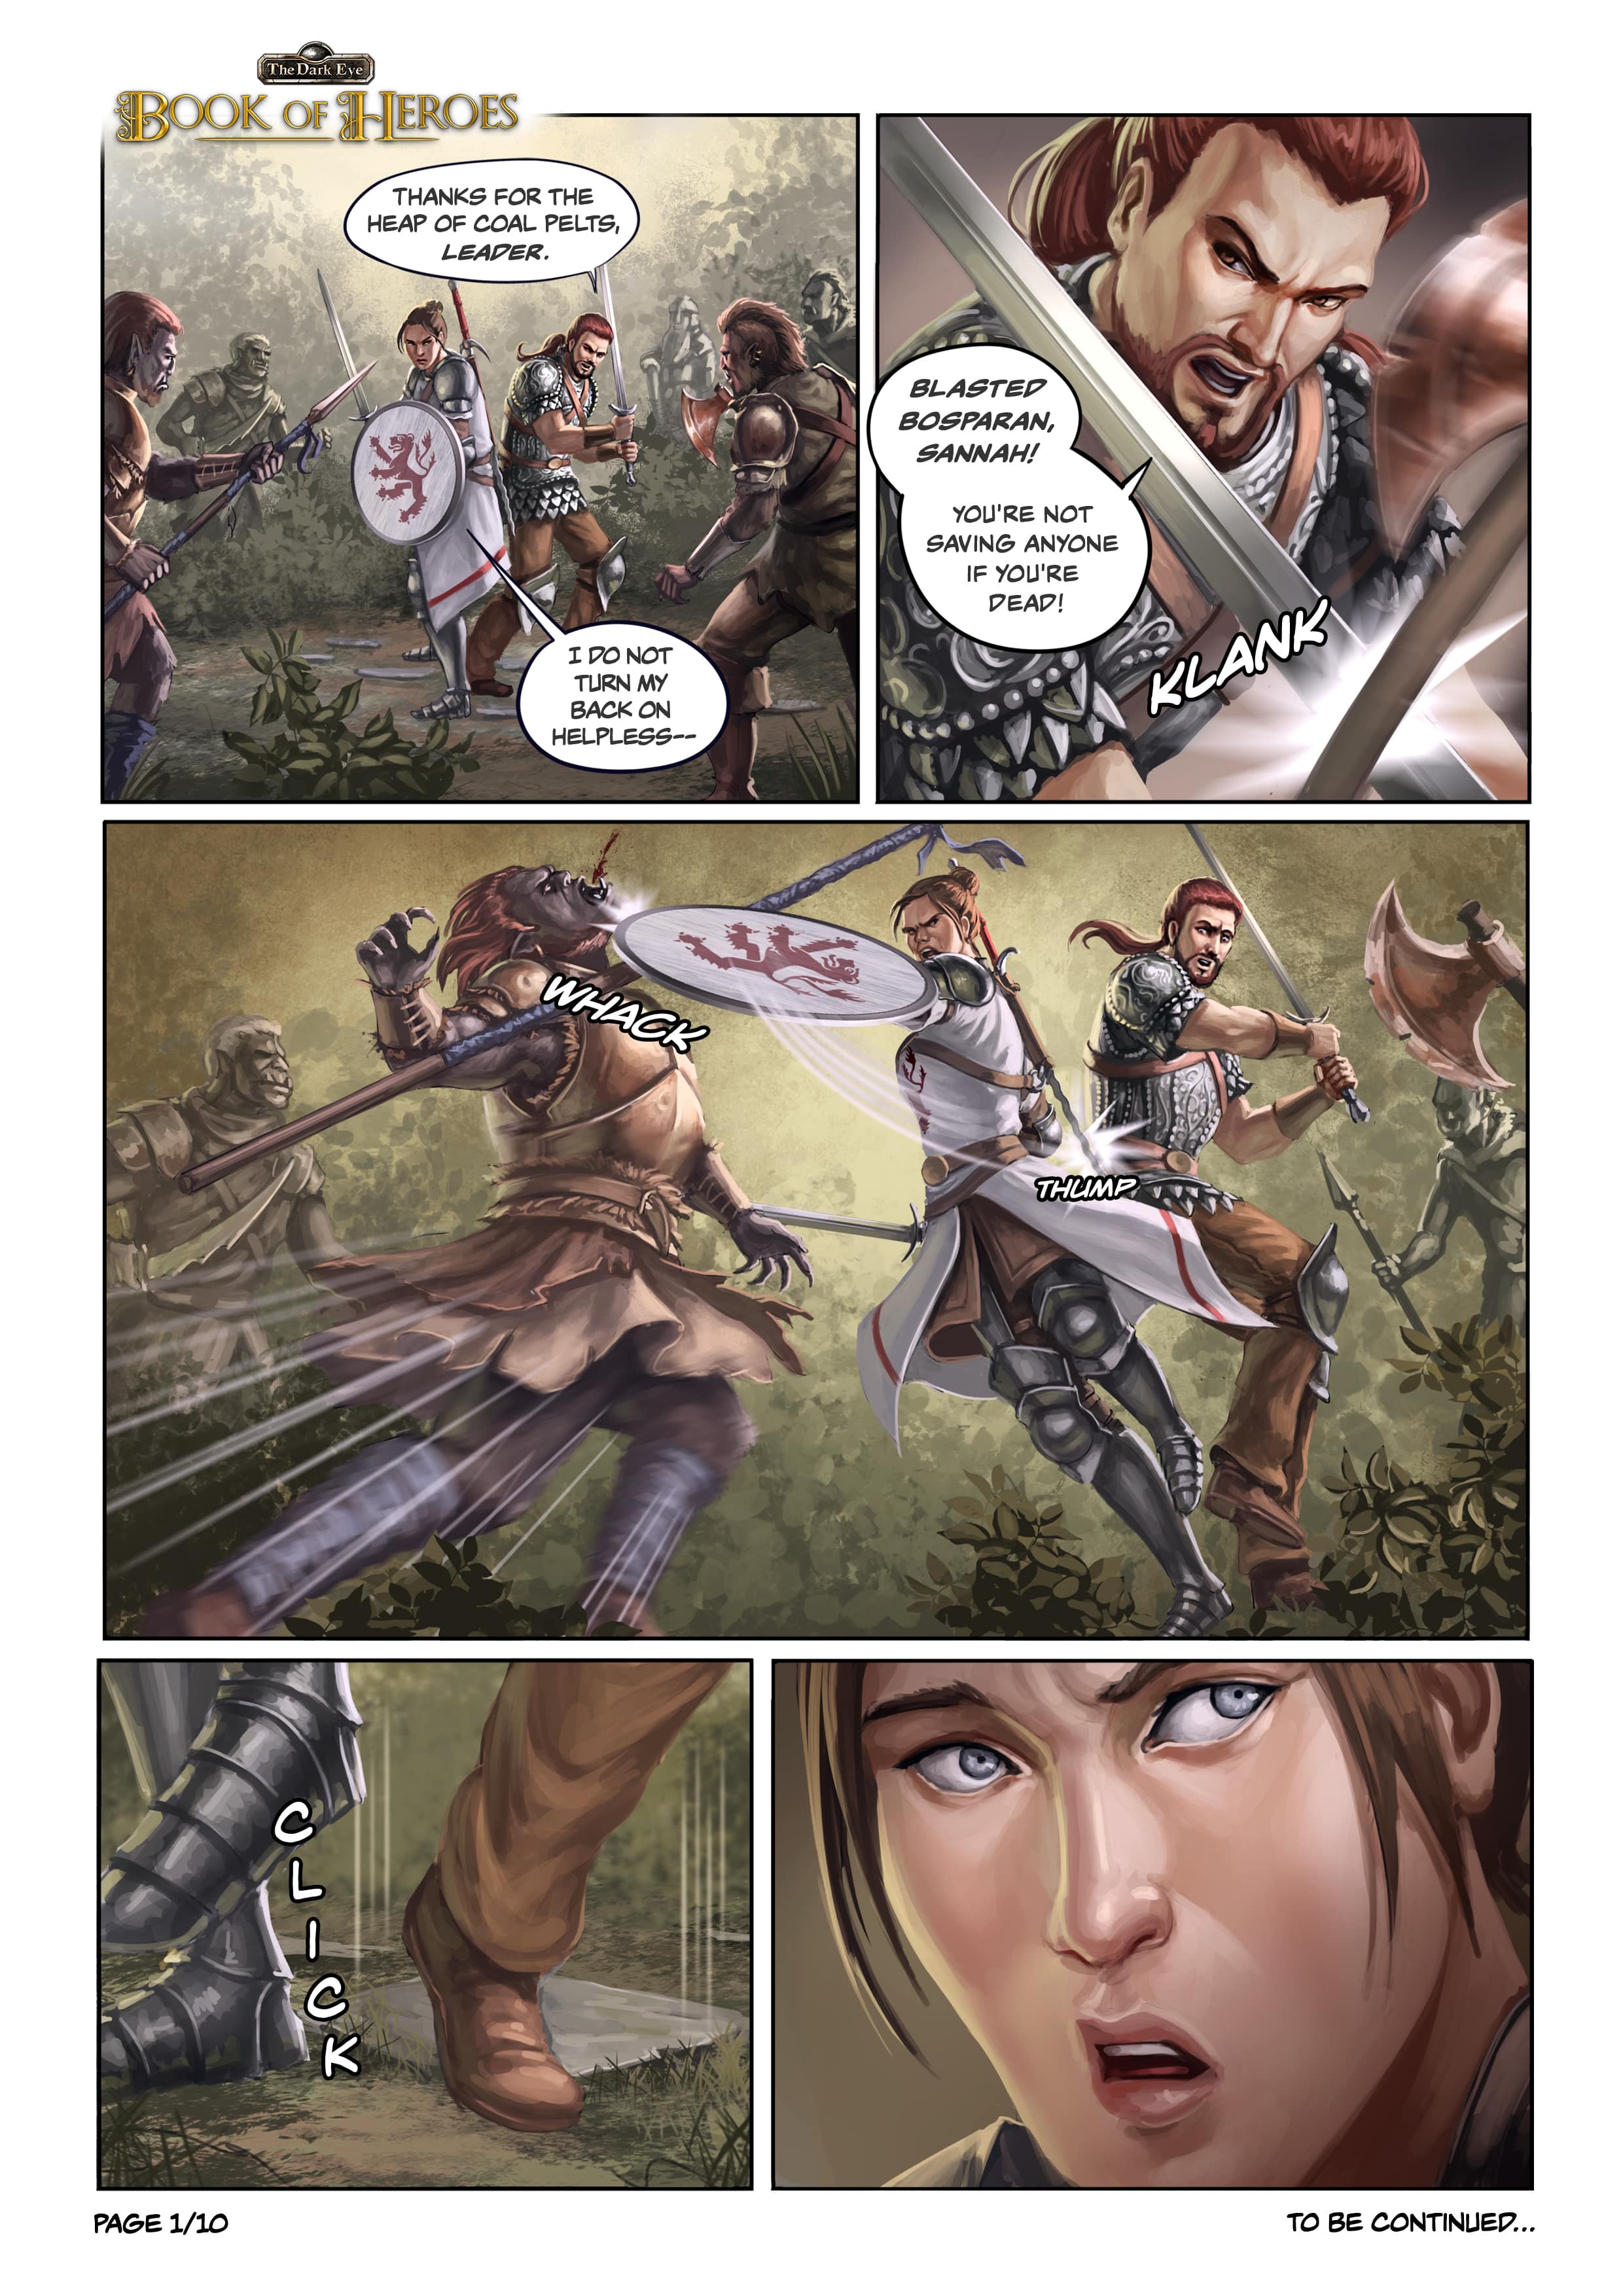 Book of Heroes Chapter 1 Page 1